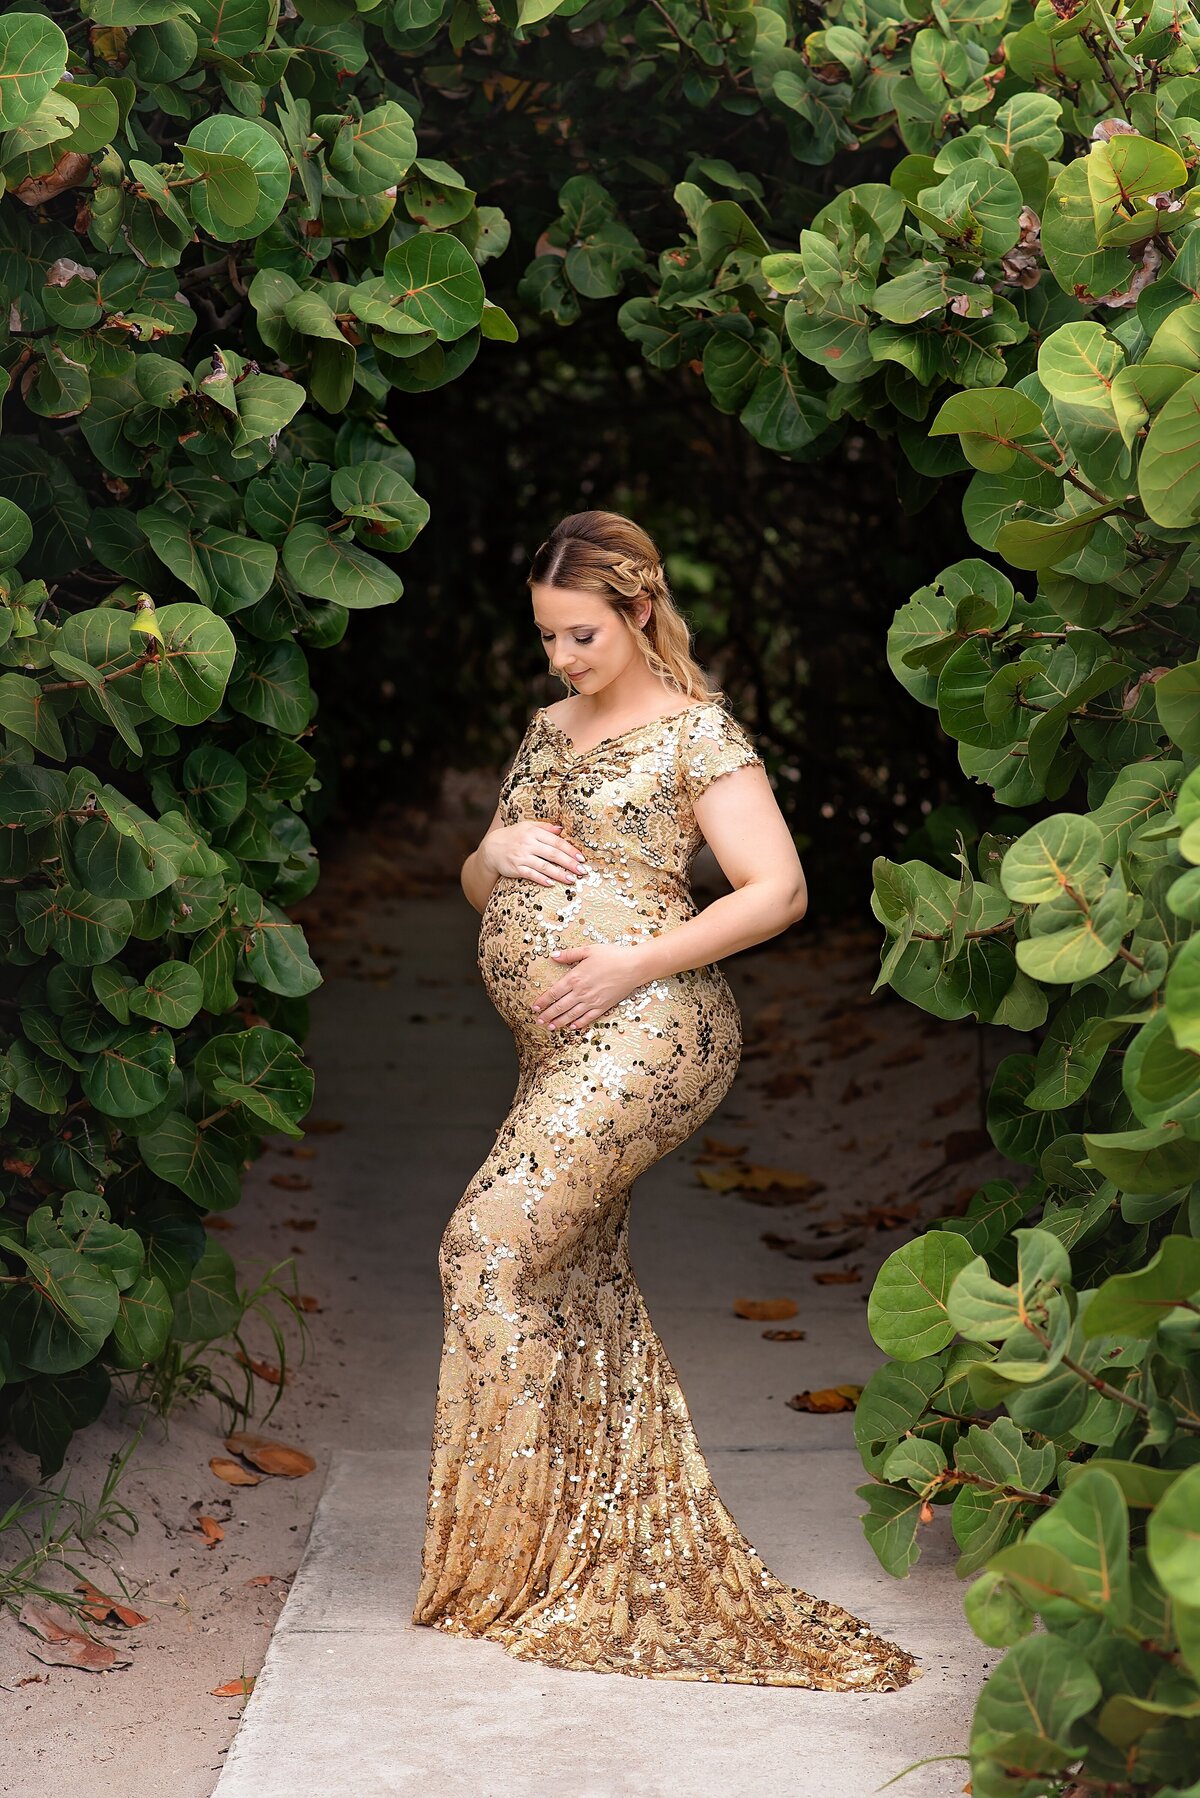 Jupiter outdoor maternity photoshoots near me at Coral Cove Beach with an elegant dress in a beautiful greenery arch.